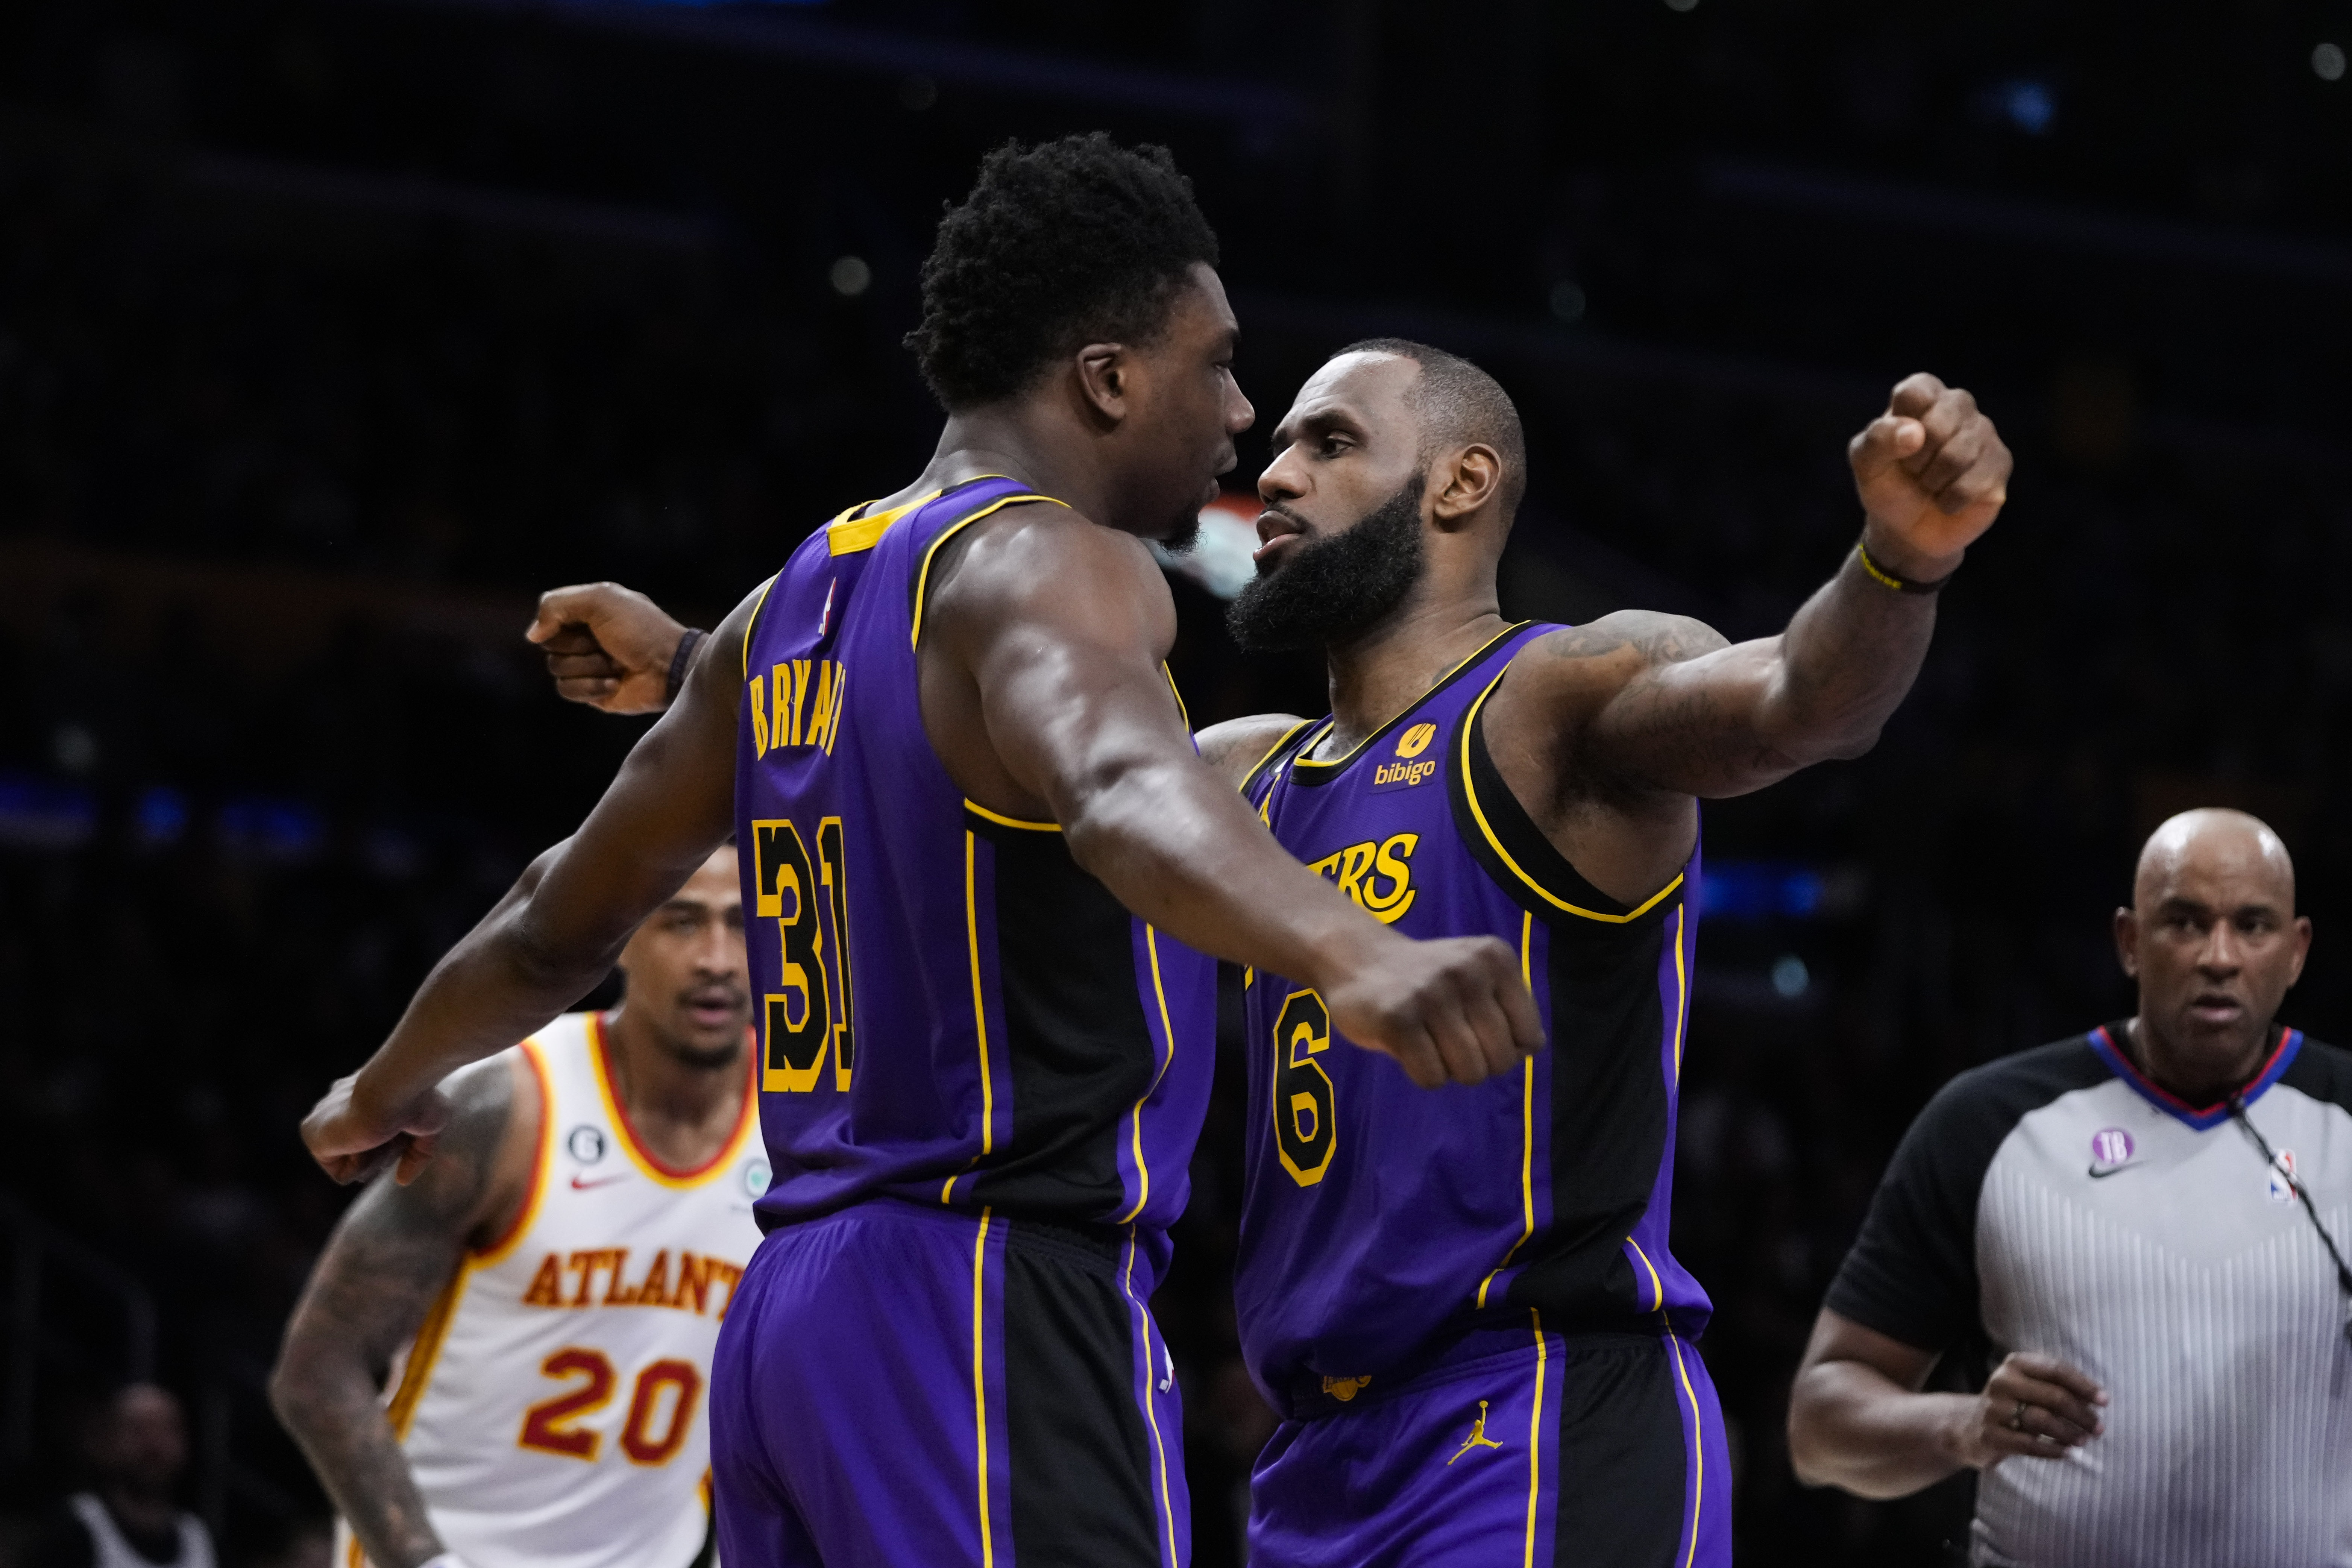 LeBron James and Kobe Bryant put on a show in Hollywood, rated G